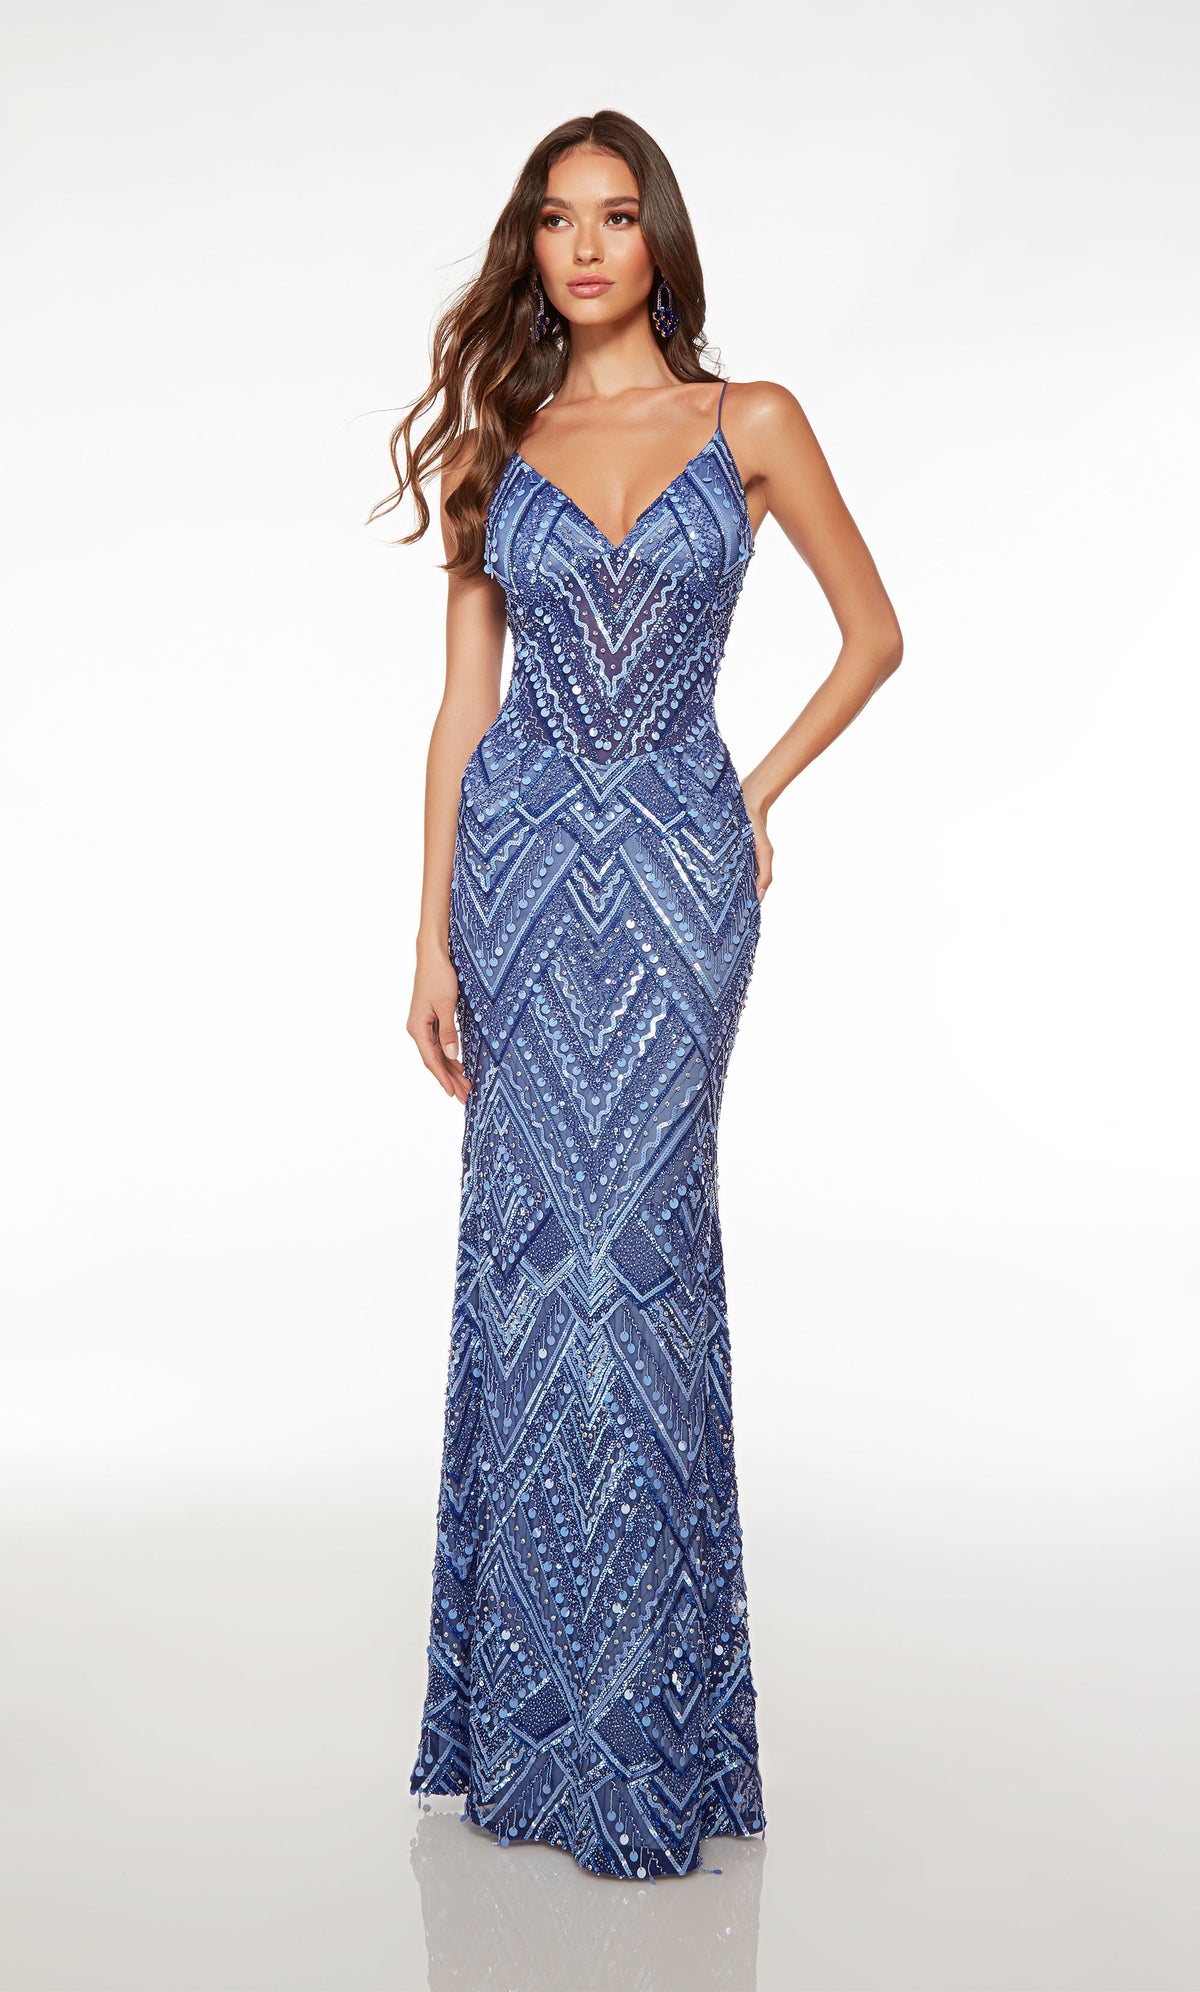 Stunning blue prom dress with intricate hand-beaded design, V neckline, and V-shaped open back for an captivating and stylish look.